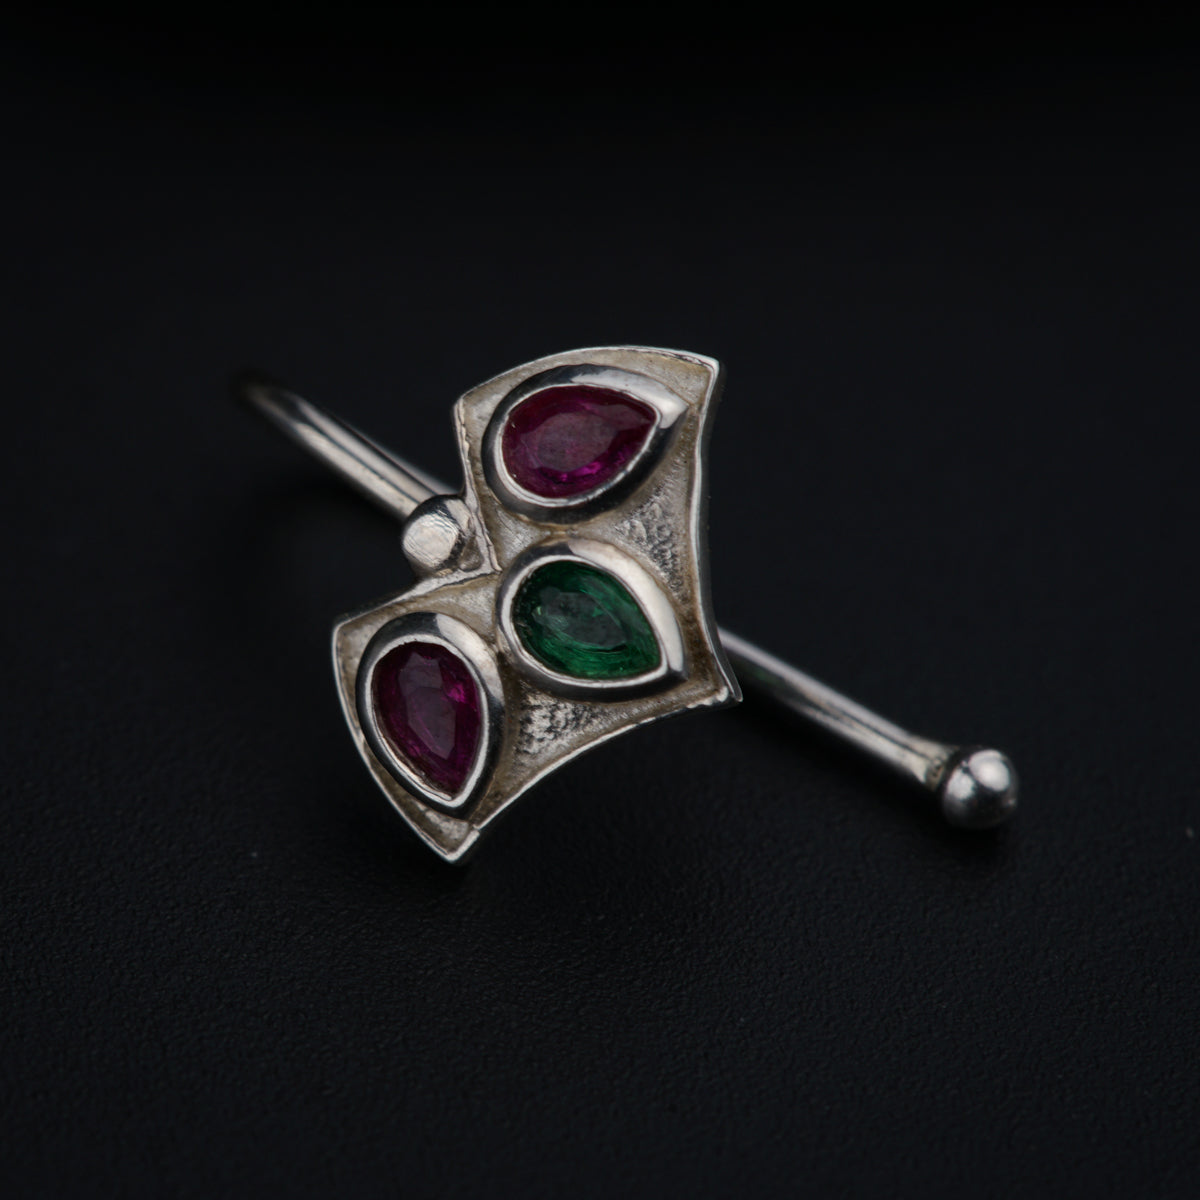 a close up of a silver brooch with a green and red stone